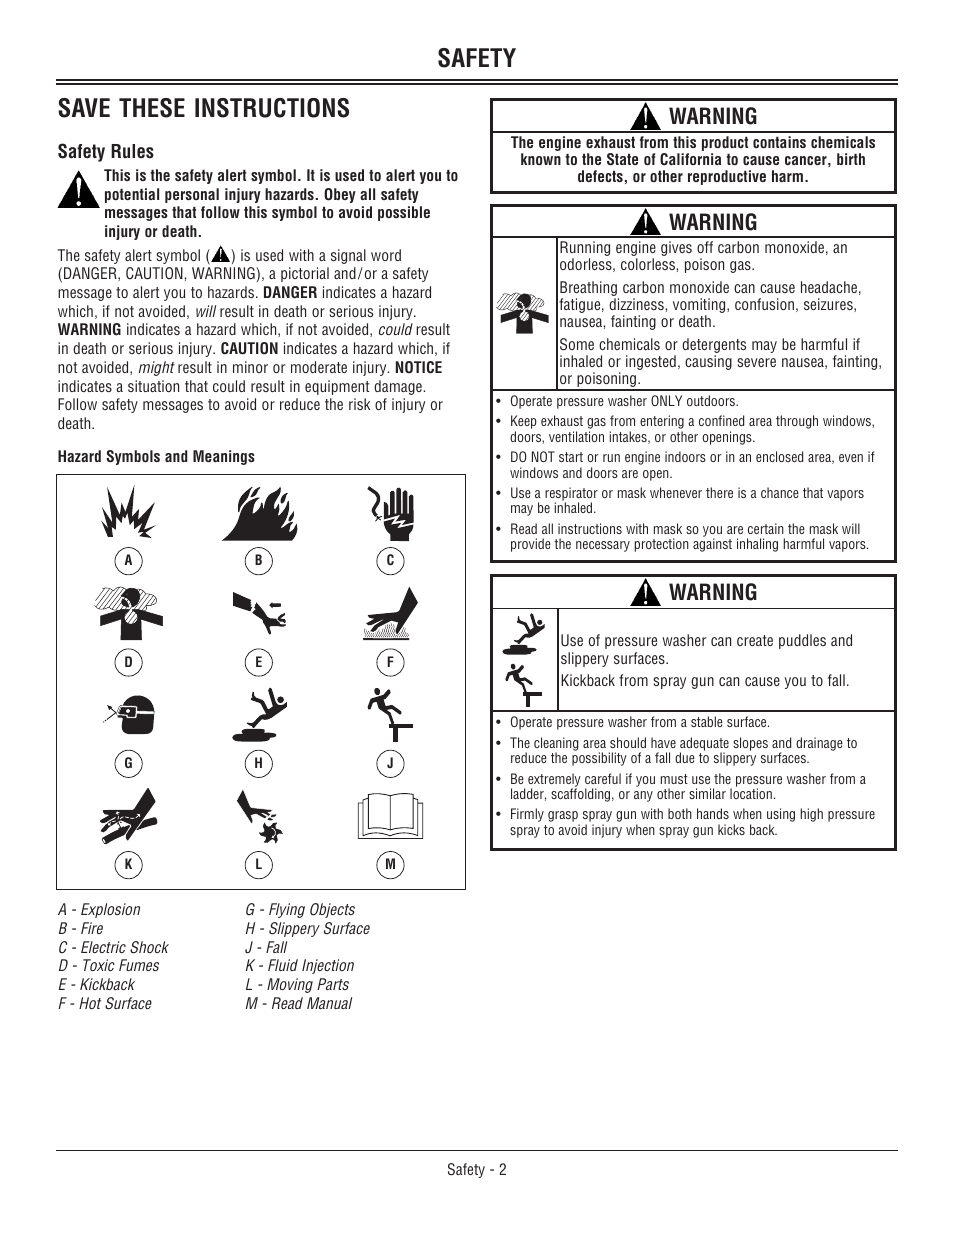 Safety, Safety save these instructions, Warning | John Deere OMM156510 User Manual | Page 6 / 24